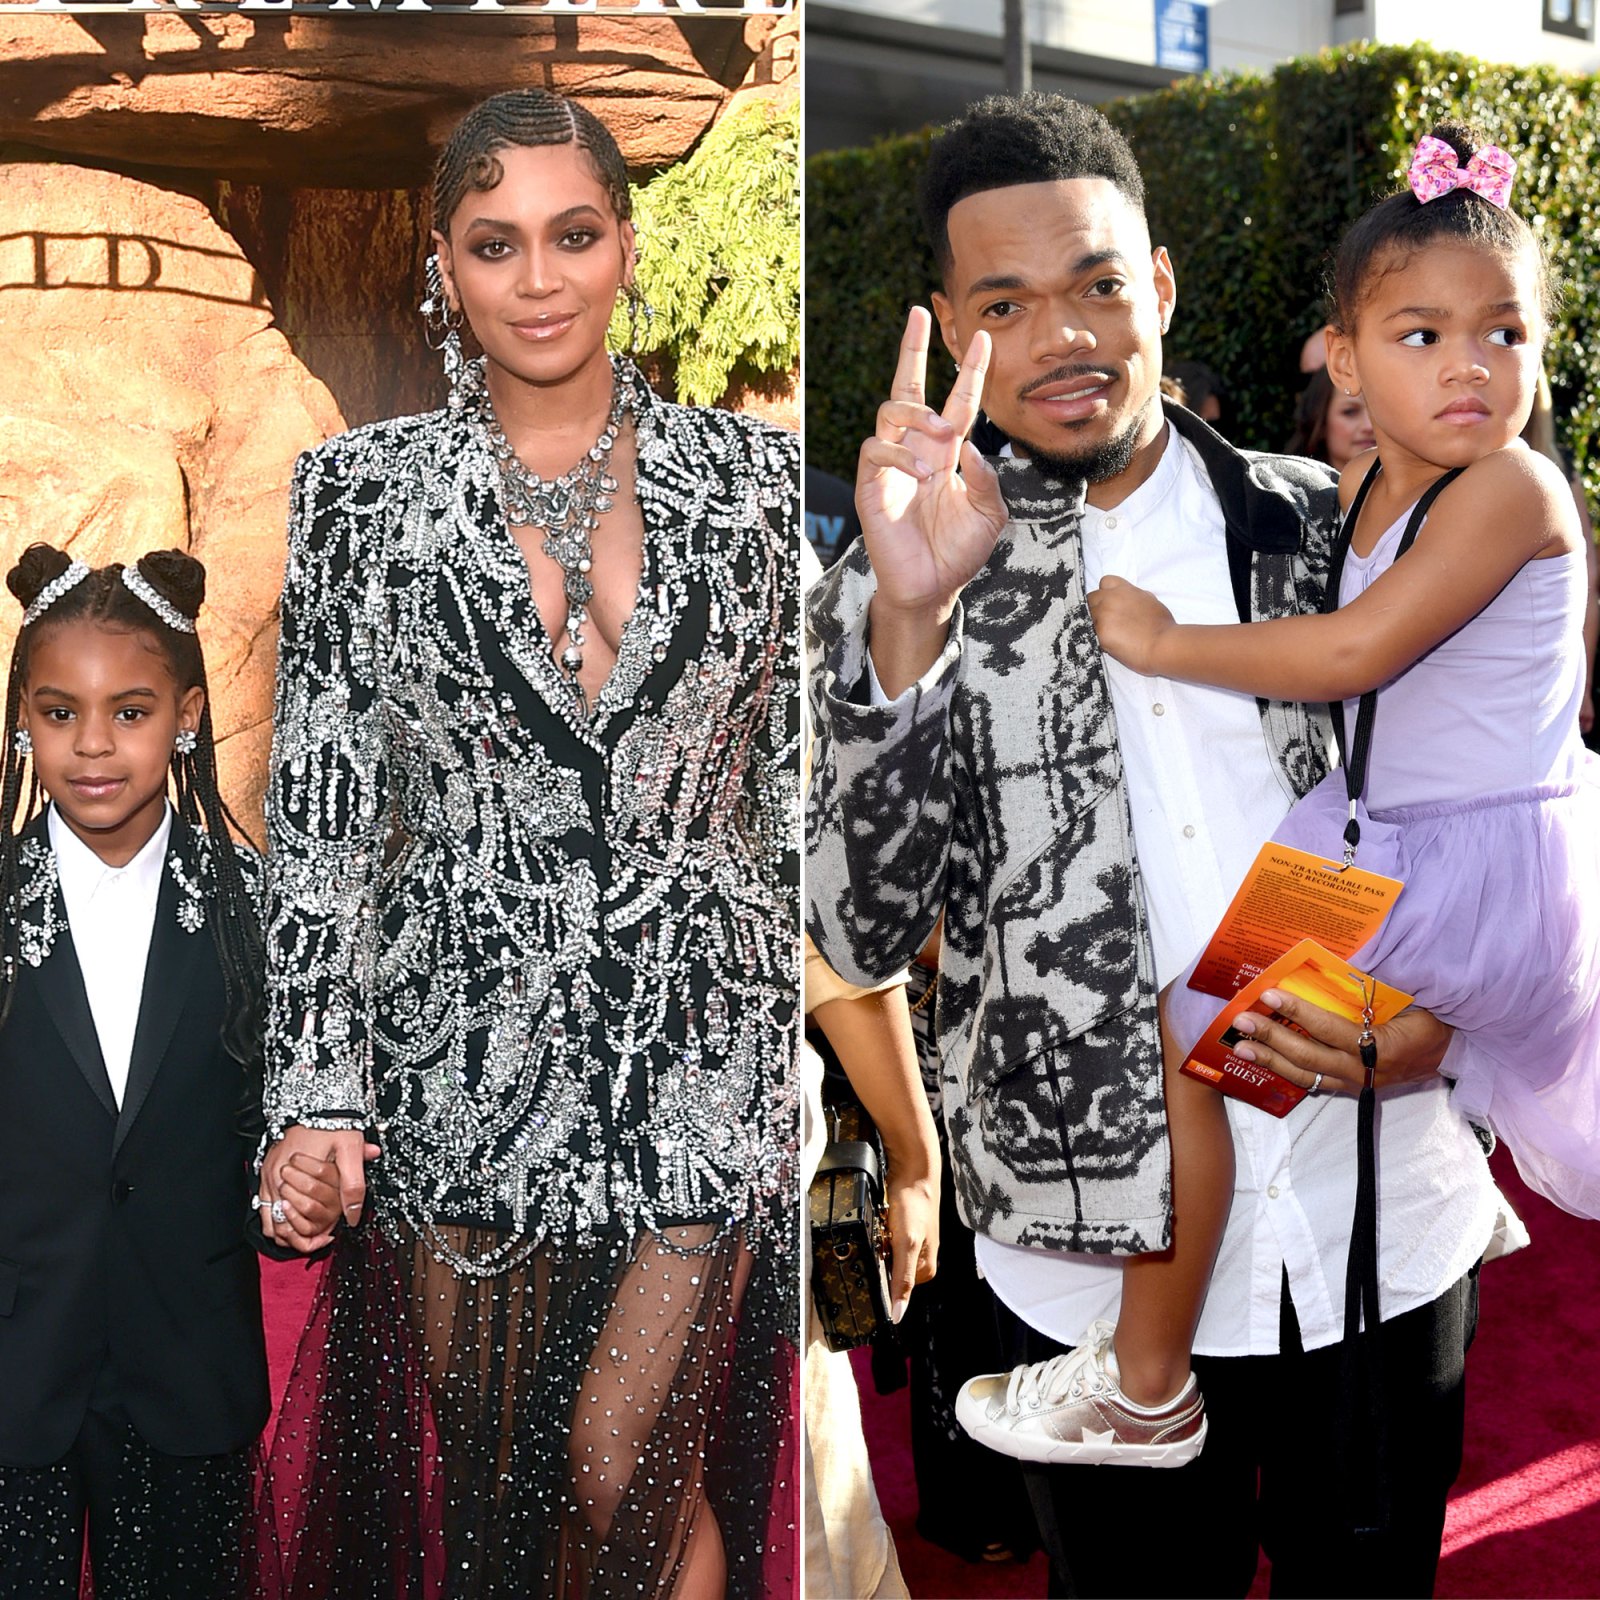 Beyonce, Chance the Rapper, Eddie Cibrian and More Bring Their Families to ‘The Lion King’ Premiere